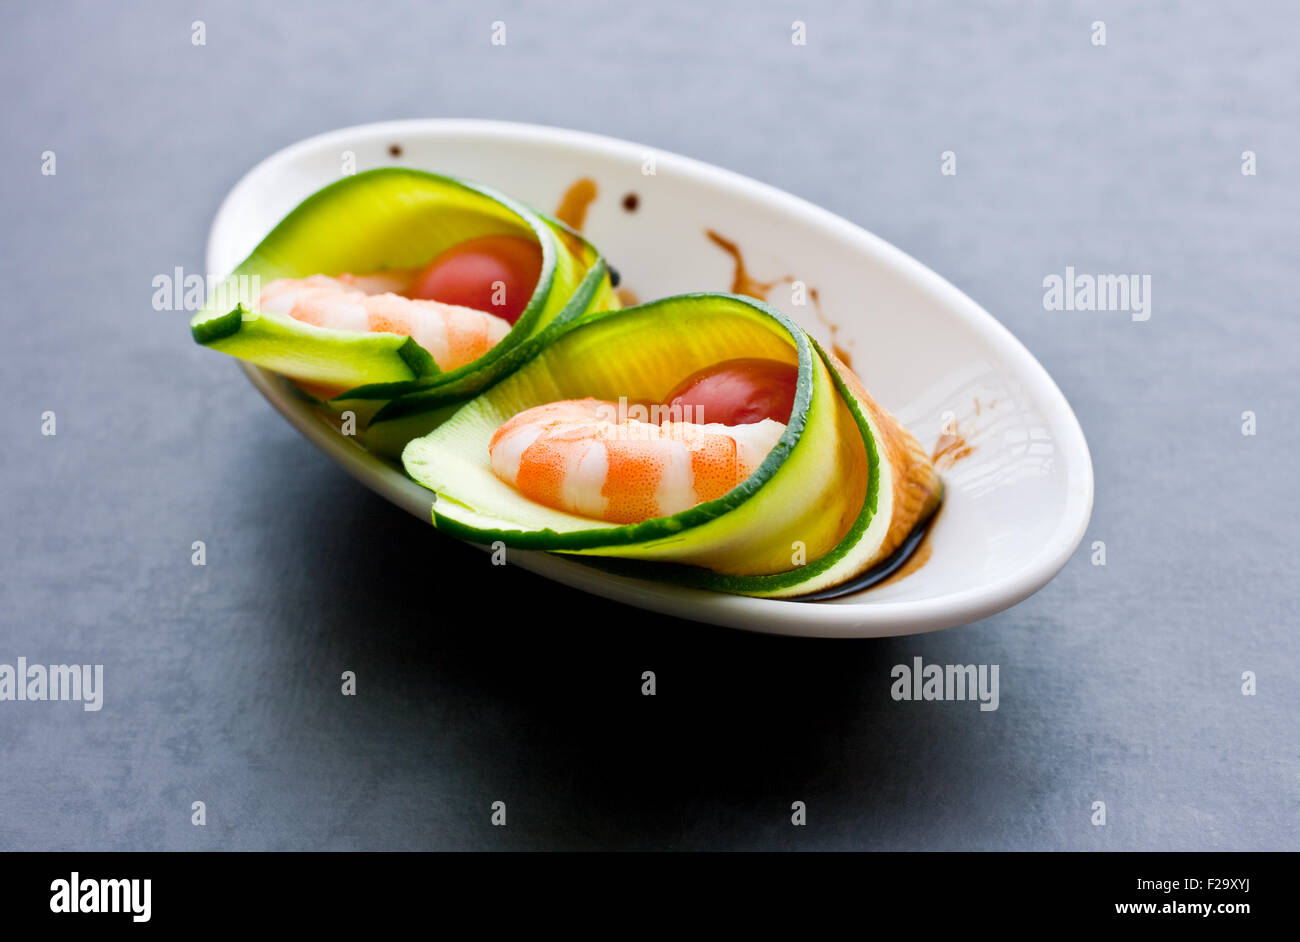 Appetizer with zucchini, shrimp and tomatoes Stock Photo